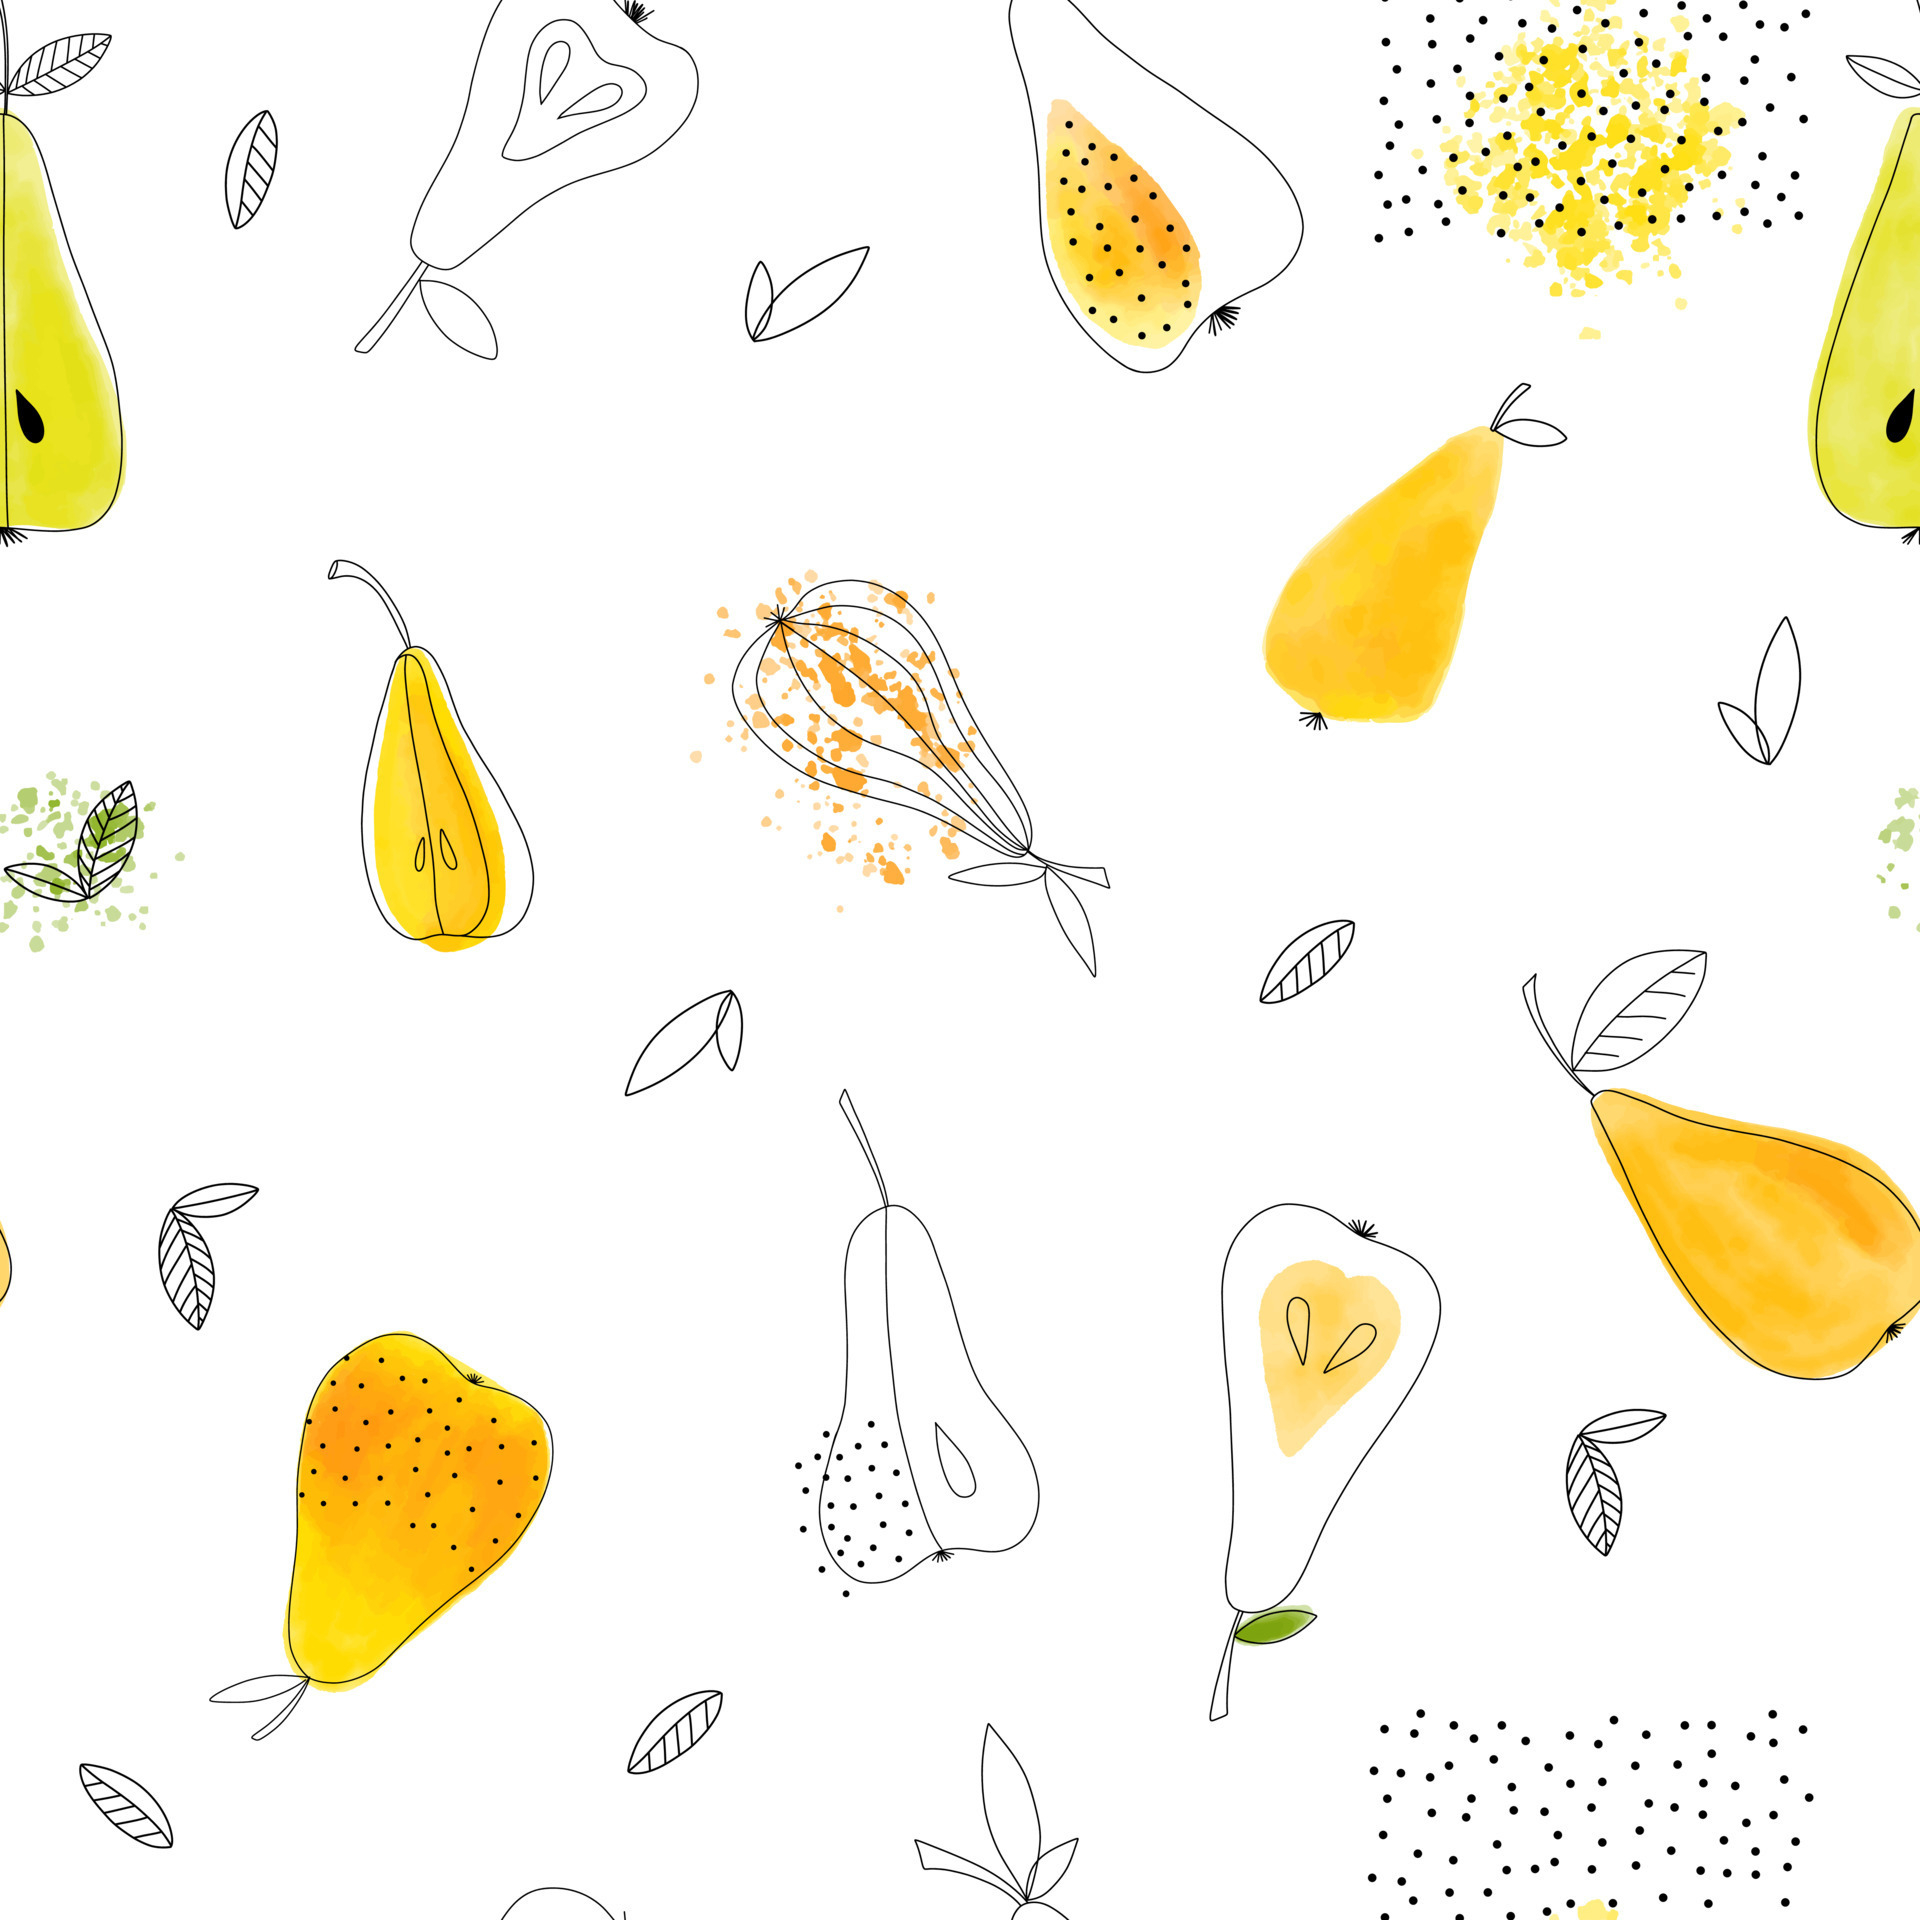 1920x1920 Watercolor pear seamless pattern on white background. Cute doodle summer fruit wallpaper. Modern texture vector design for fabric, apparel, covers, wrapping paper, scrapbooking, textile. 7820595 Vector Art